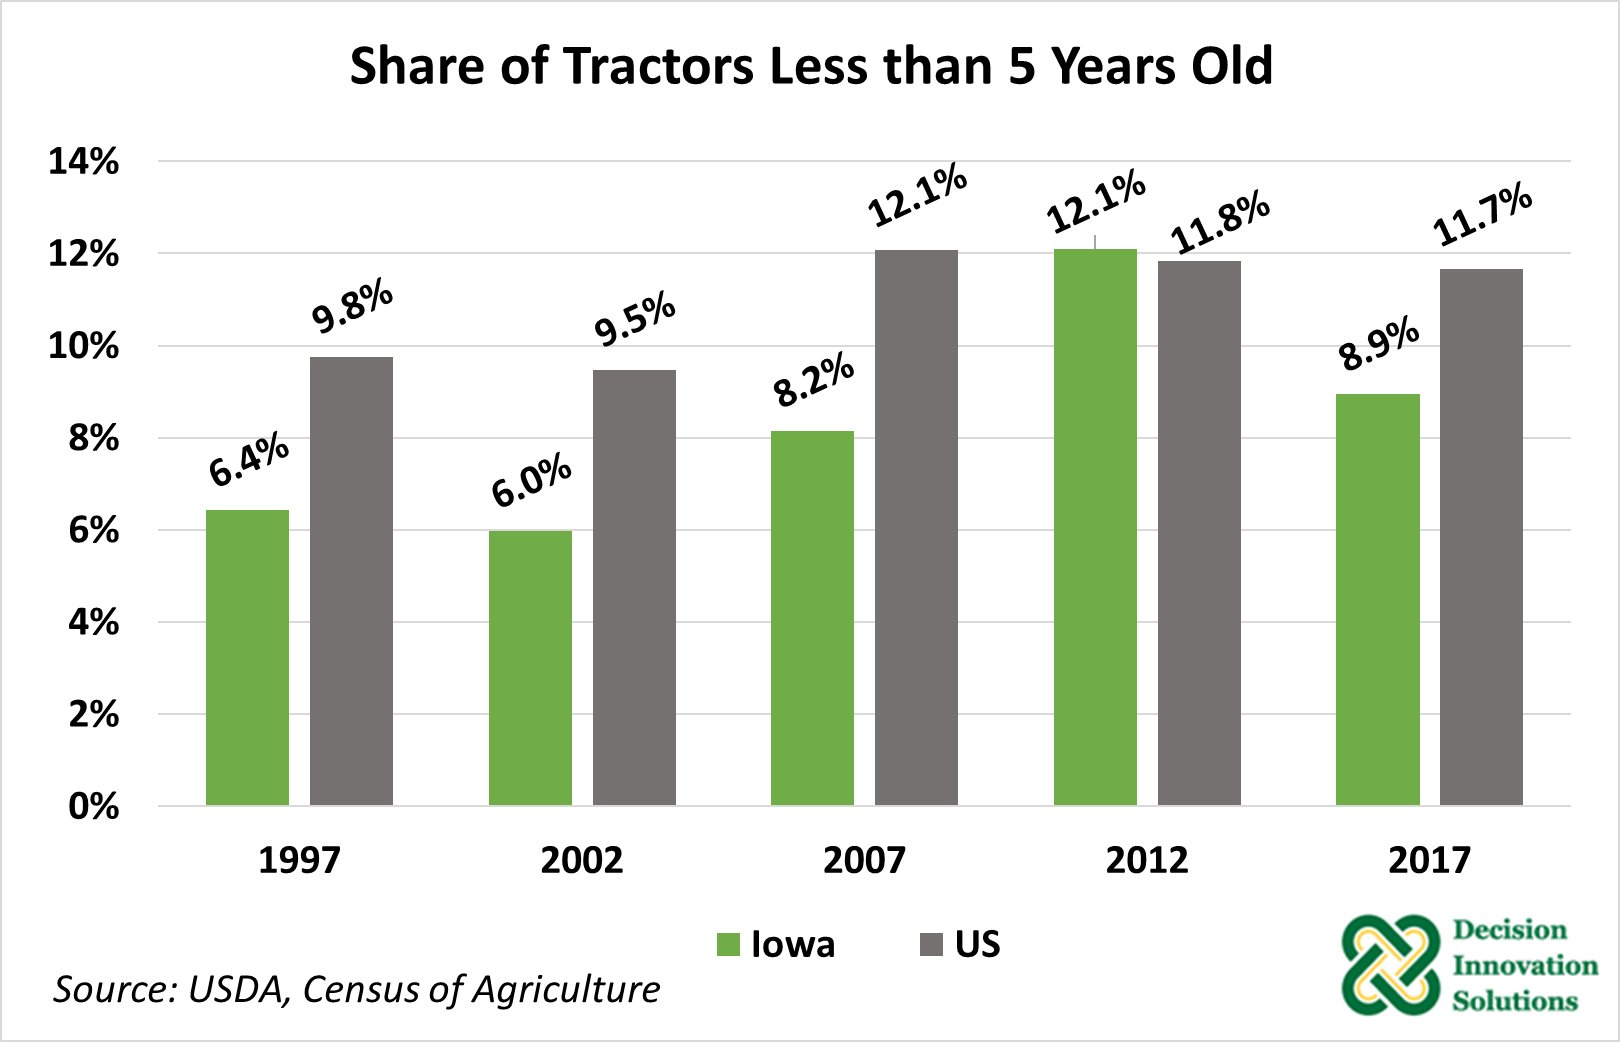 Figure 6. Share of Tractors Less than 5 Years Old 